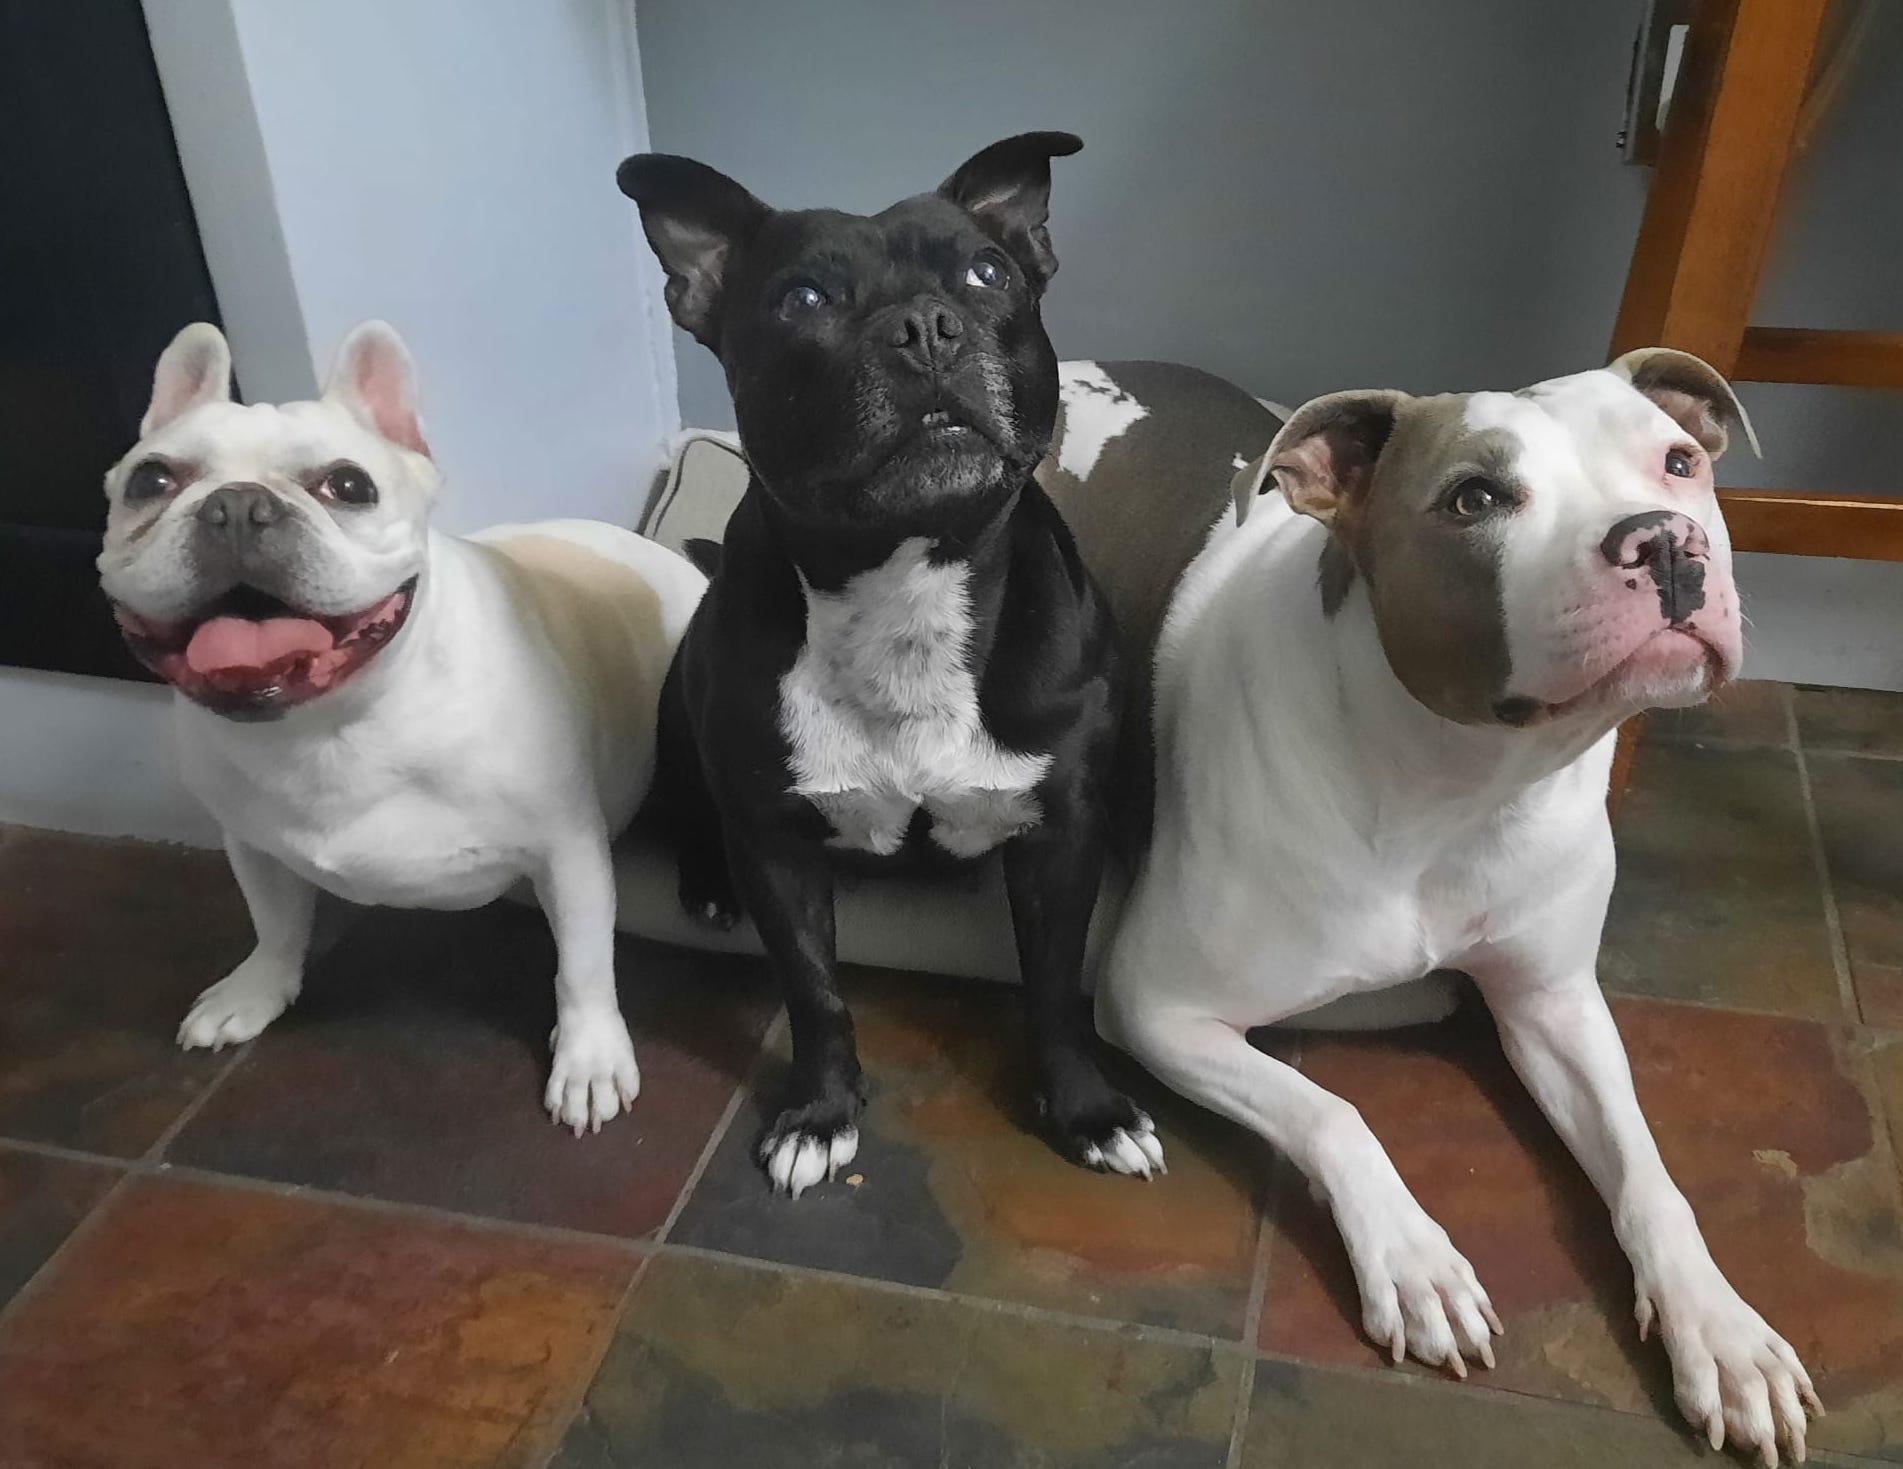 Three dogs looking longingly at the camera as they are about to have dinner. On the left is Nacho, Jess's cream colored French Bulldog, in the middle is Petunia, a black American Staffordshire Terrier, and on the right is Inu, a white and grey Pitbull.